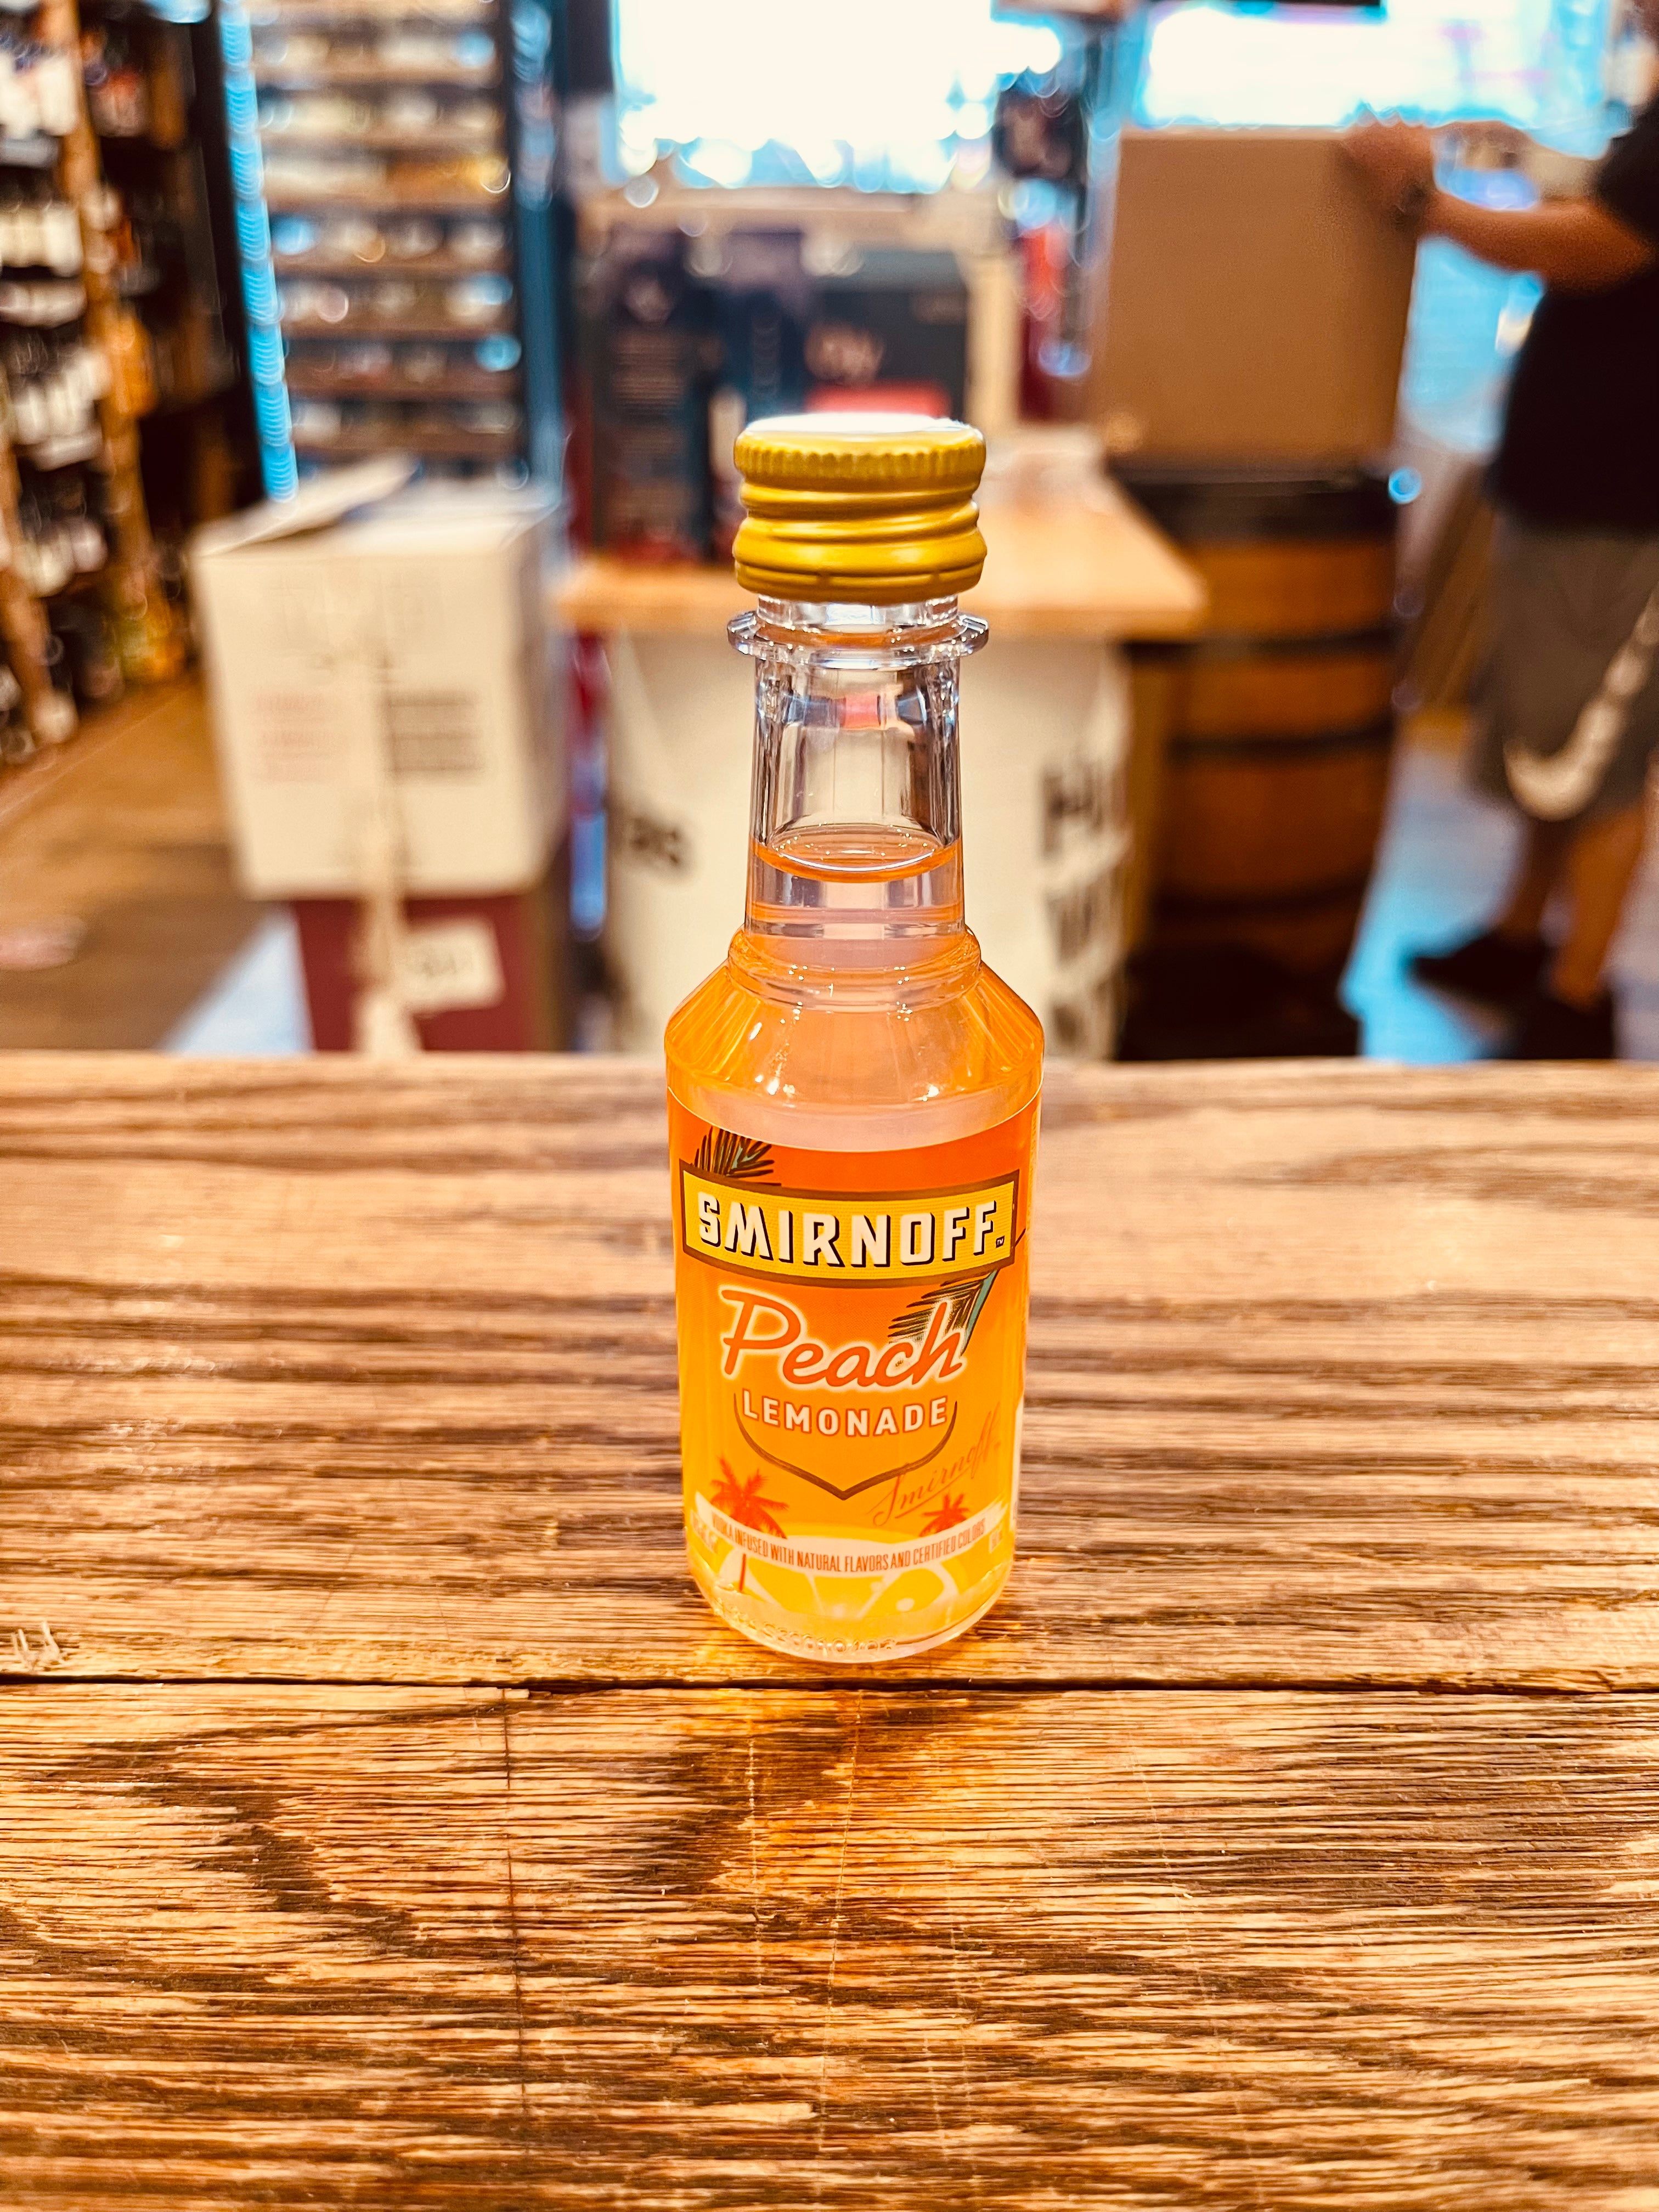 Smirnoff Peach Lemonade 50mL a small clear plastic bottle with an orange label and golden top